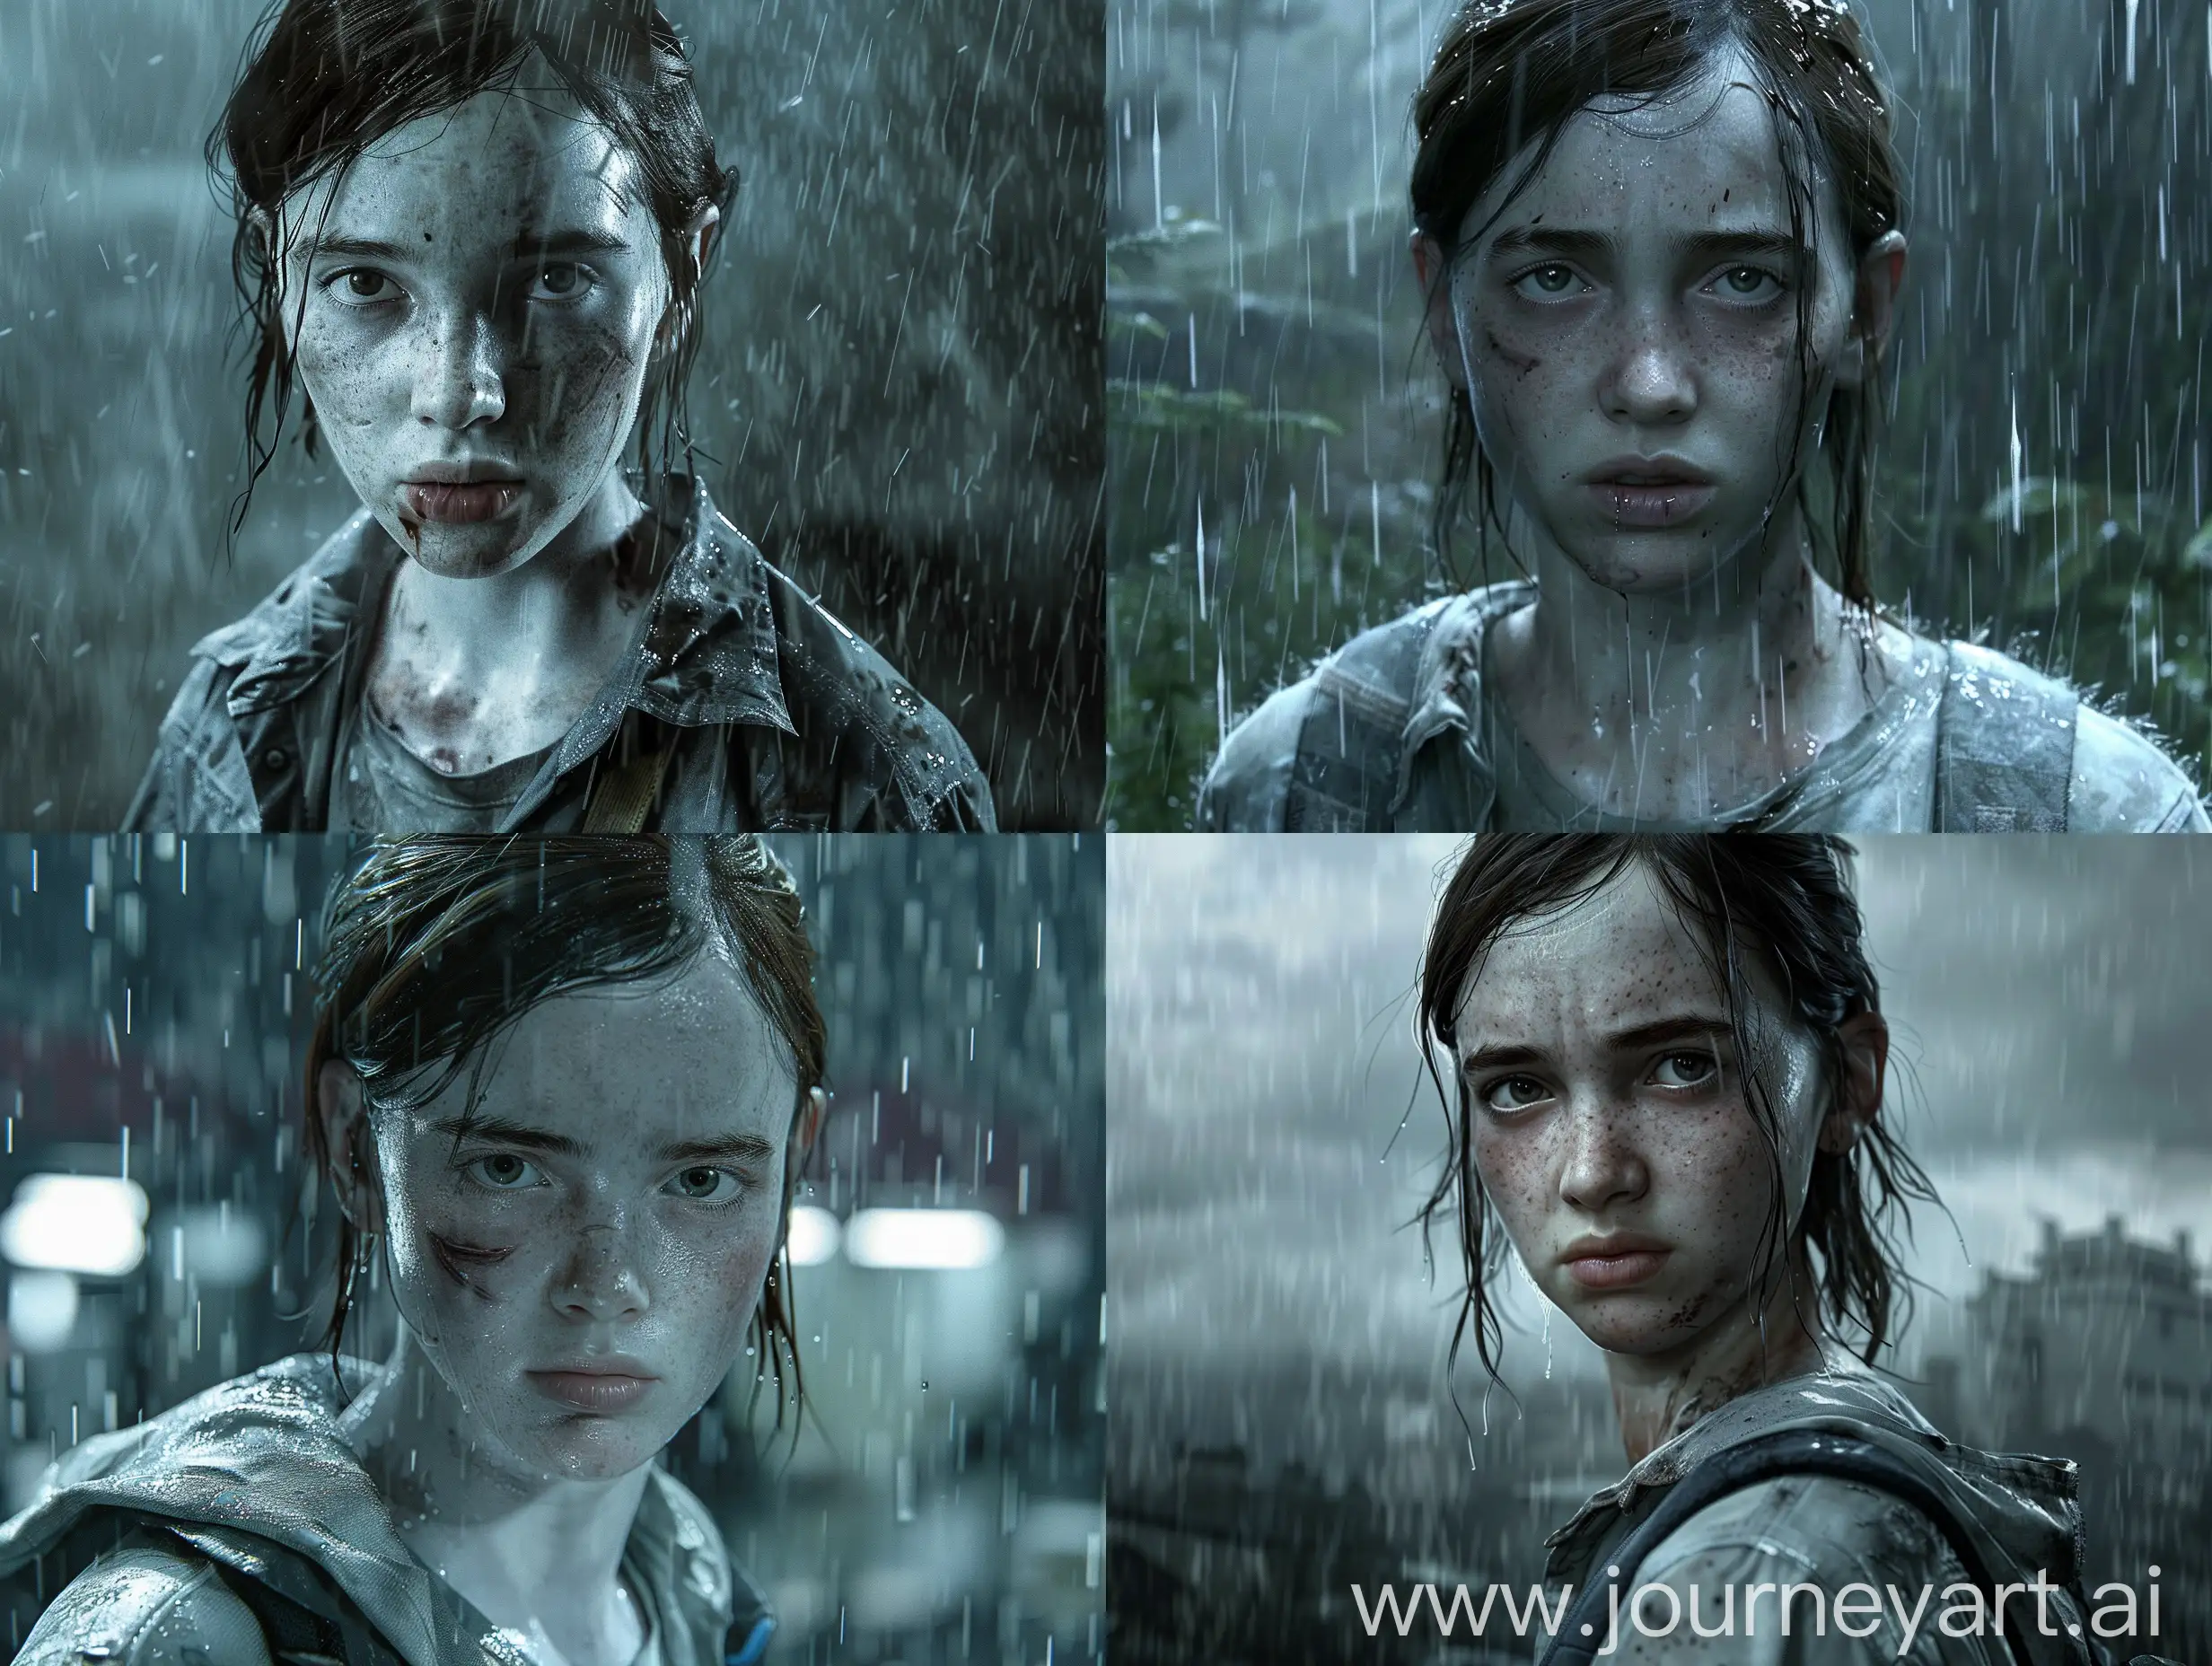 Ellie from The Last of Us Part II in a hyper-realistic setting with white skin and a rainy atmosphere, visualized in 8k resolution. This would indeed create a very high-quality and immersive visual examination 